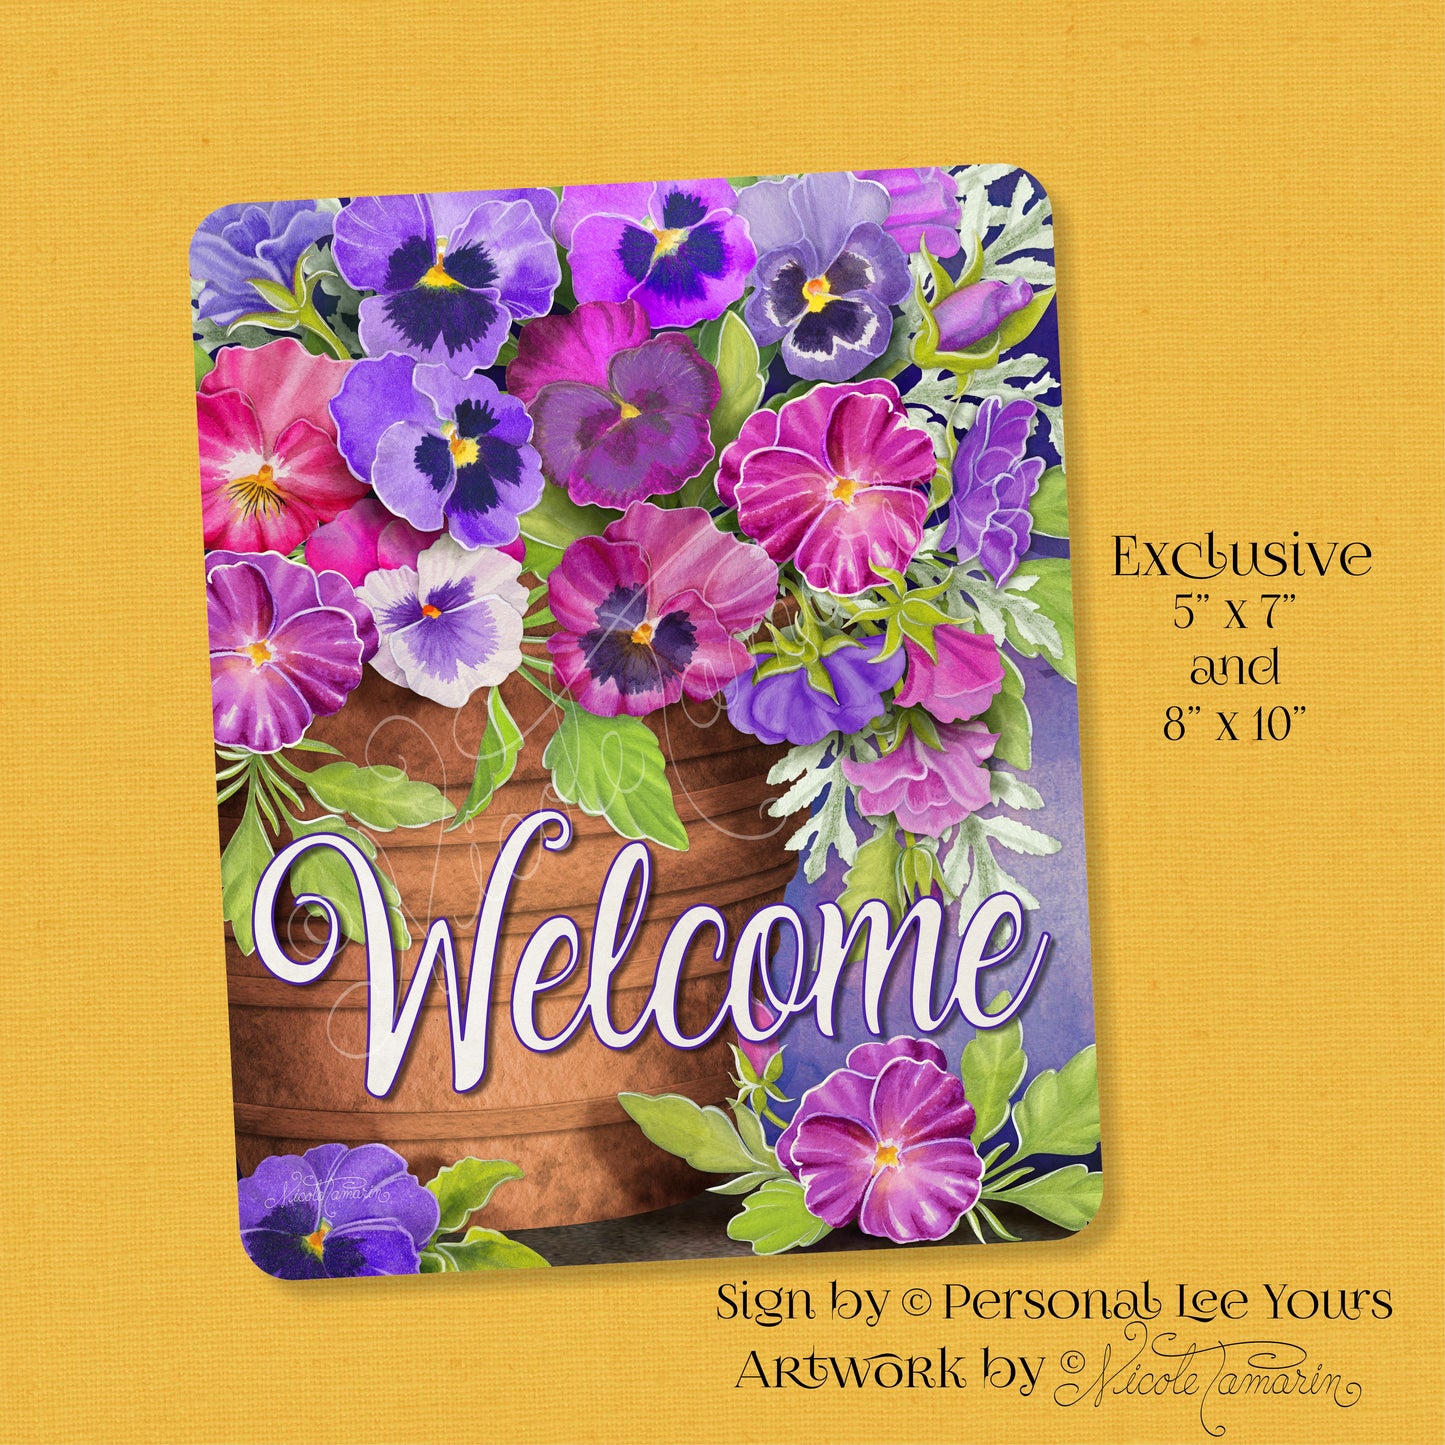 Nicole Tamarin Exclusive Sign * Pansy Welcome * 2 Sizes * Lightweight Metal